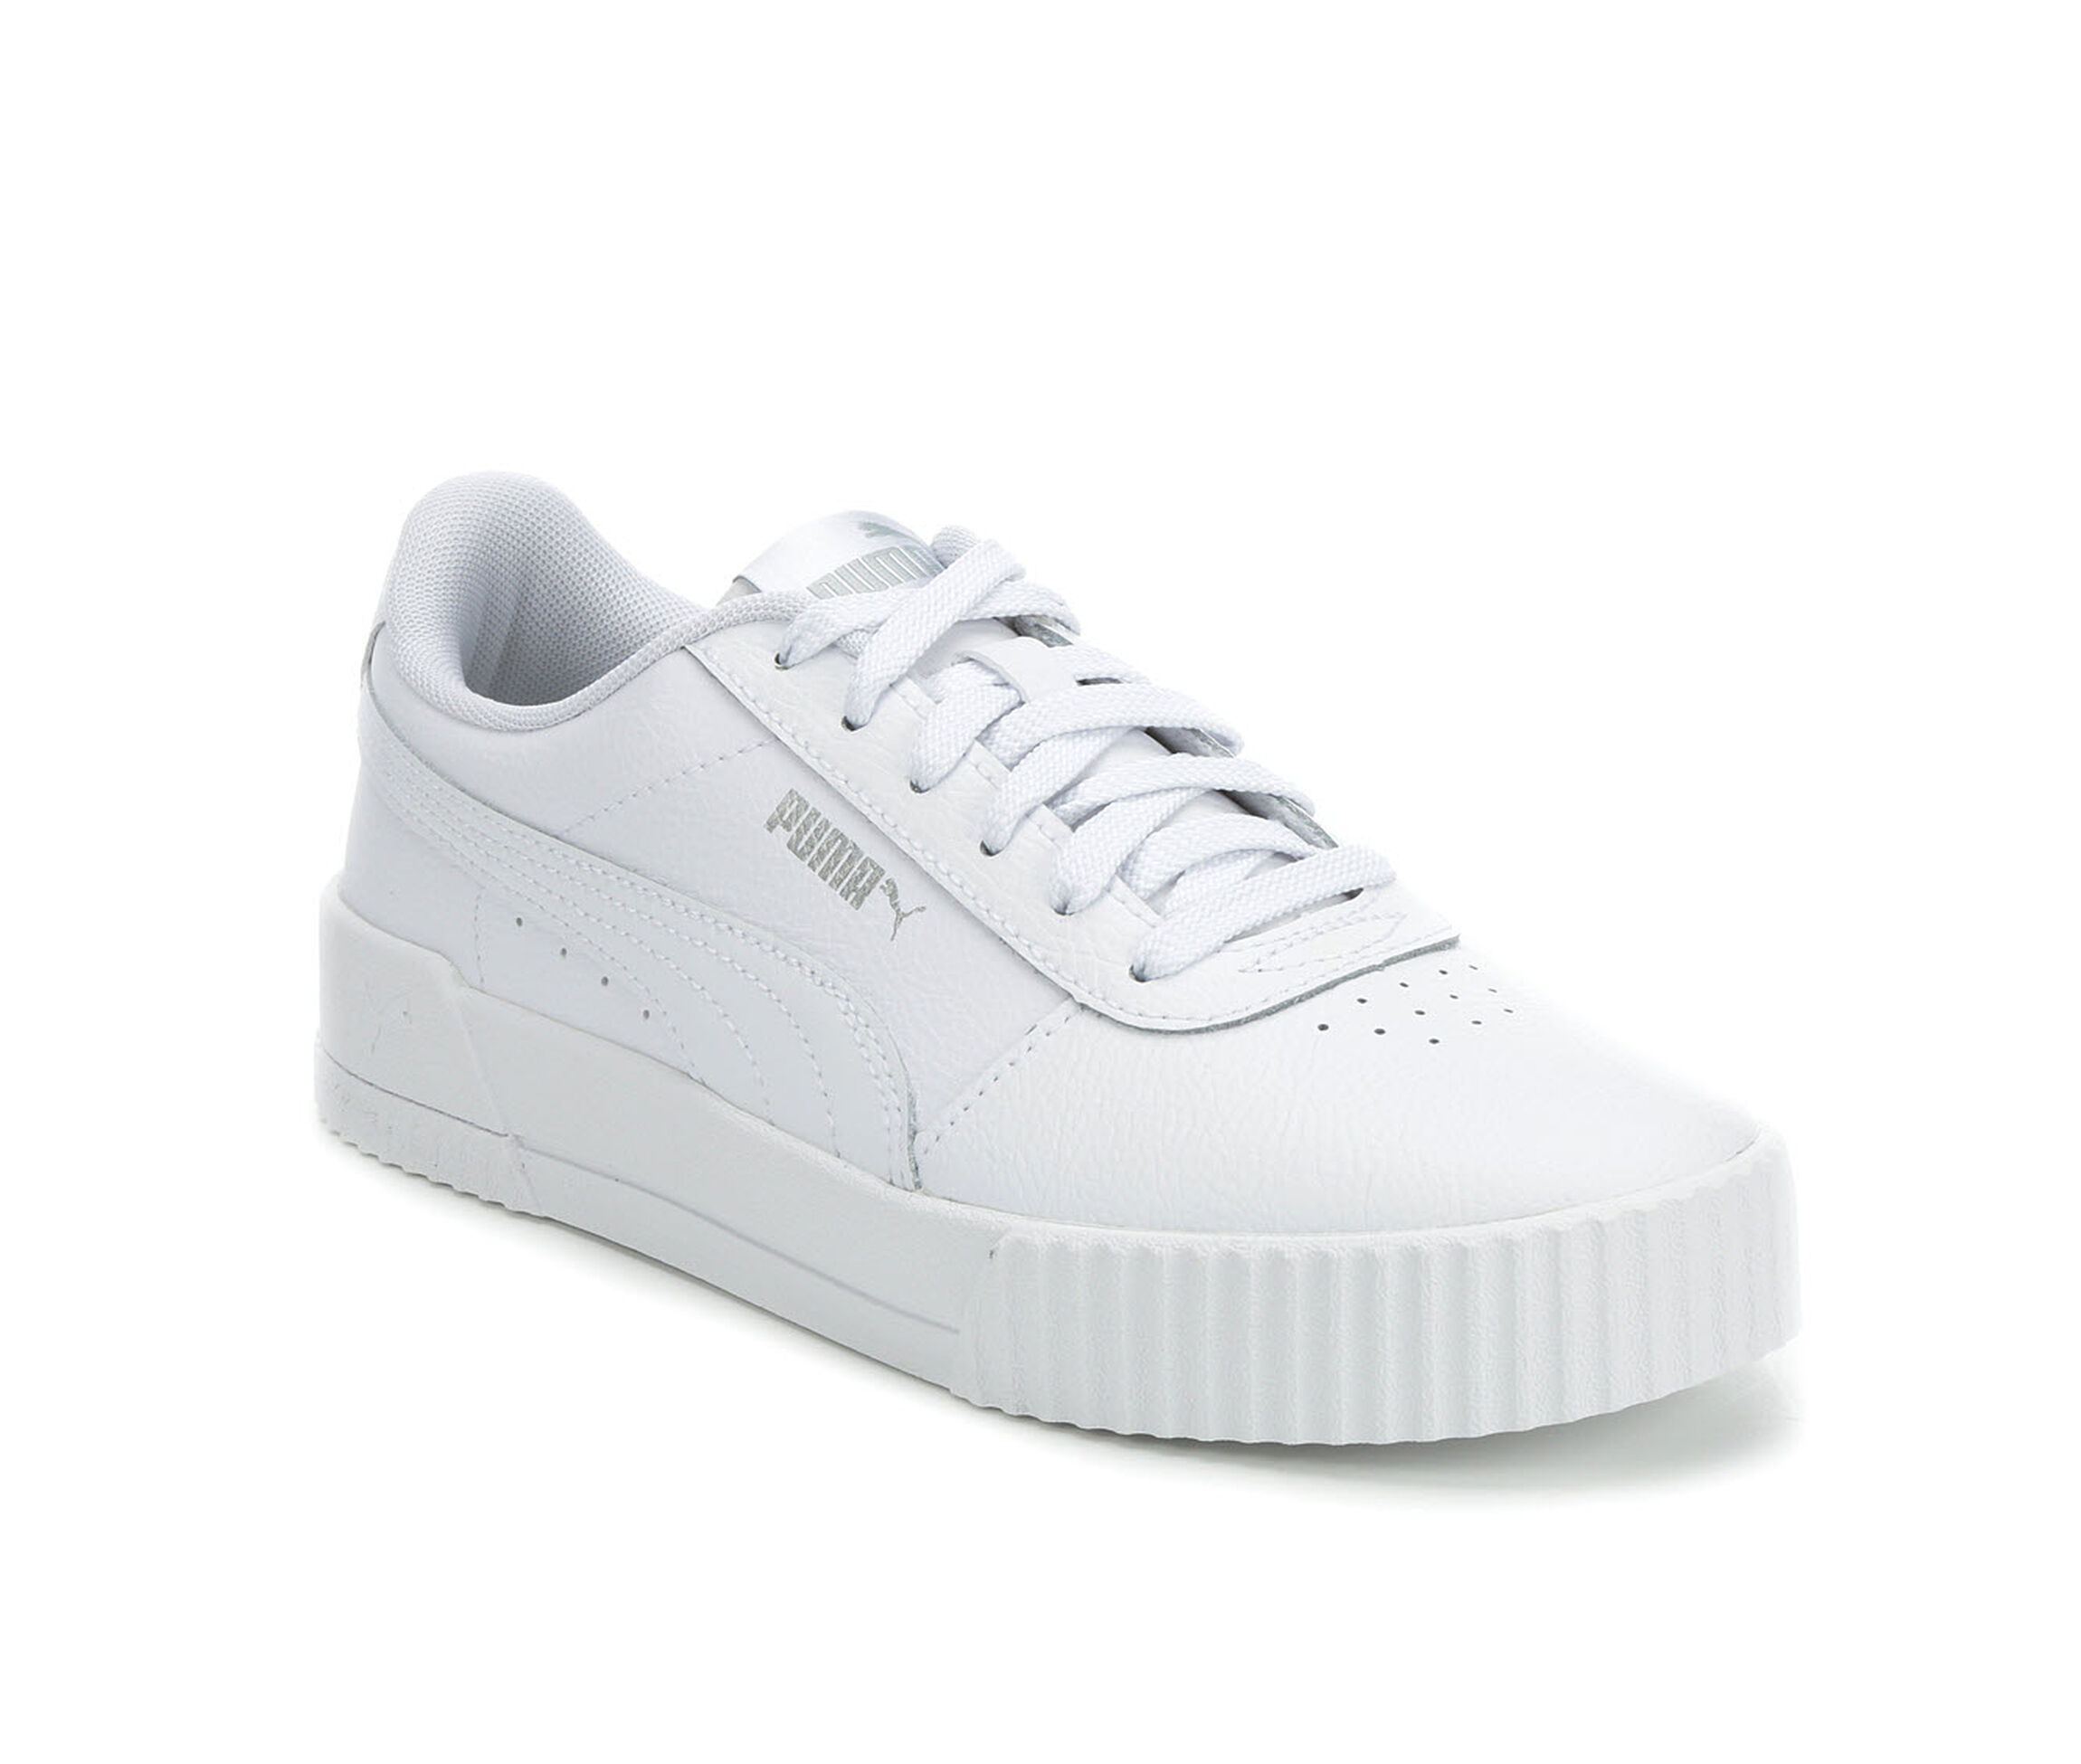 Puma Shoes for Women | Sneakers, Slip-Ons, and Accessories